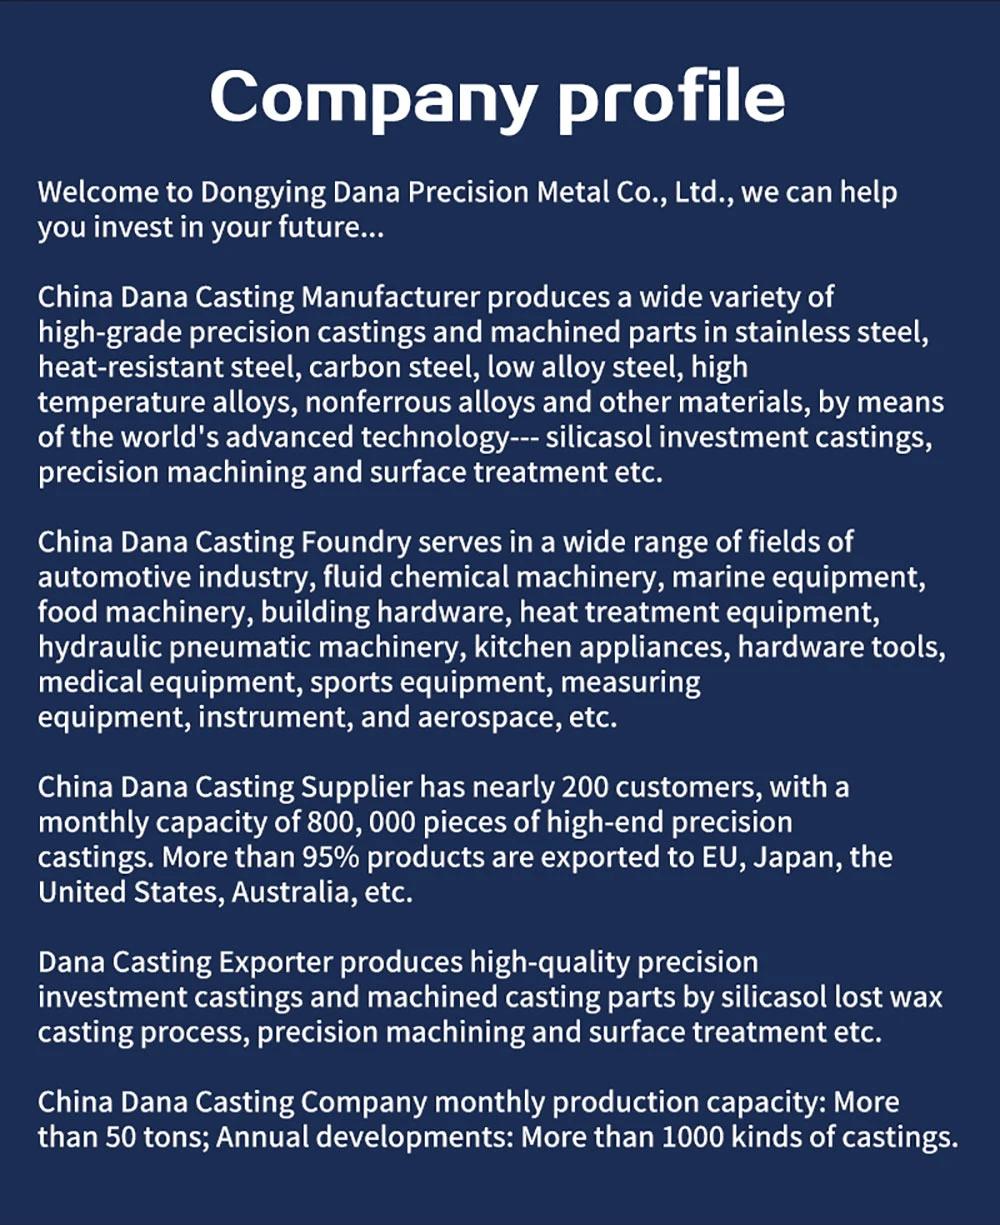 Die Casting/Steel Casting/ Investment Casting/ Machining/ Lost Wax Casting/ Precision Casting